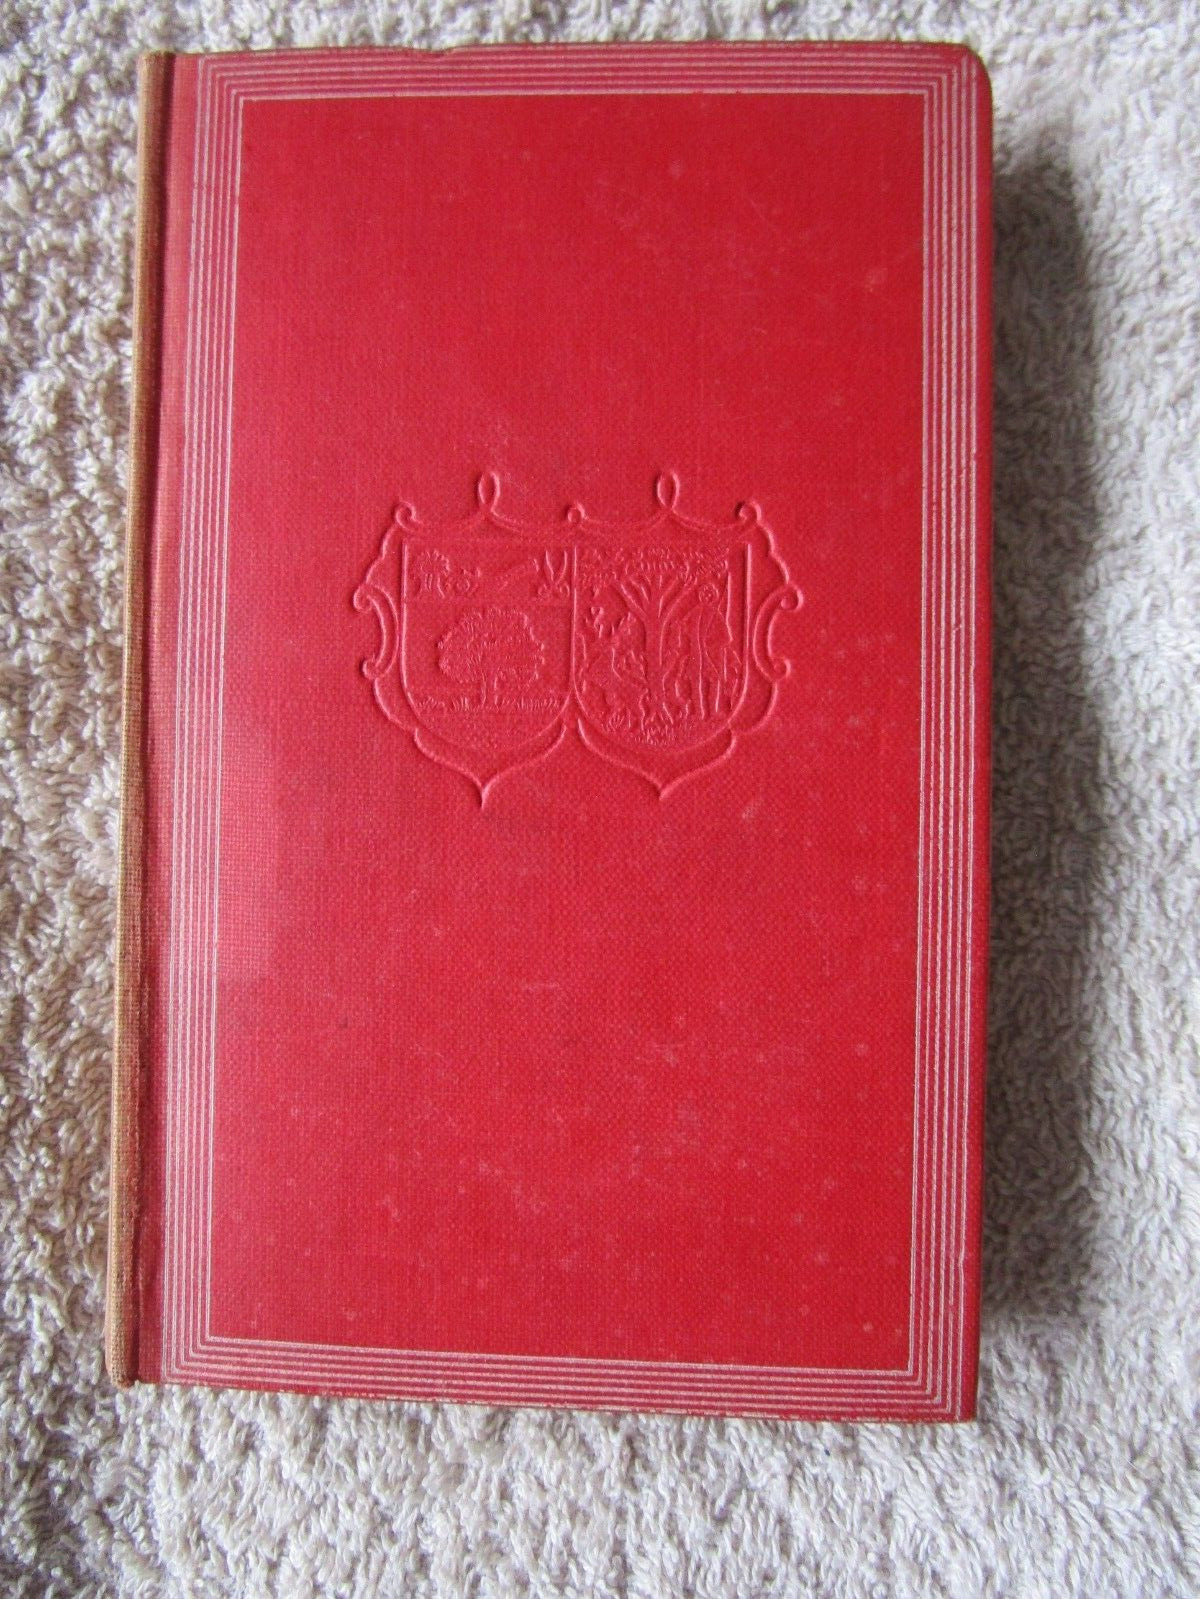 1929 LITTLE GUIDE TO BEDFORDSHIRE & HUNTINGDONSHIRE